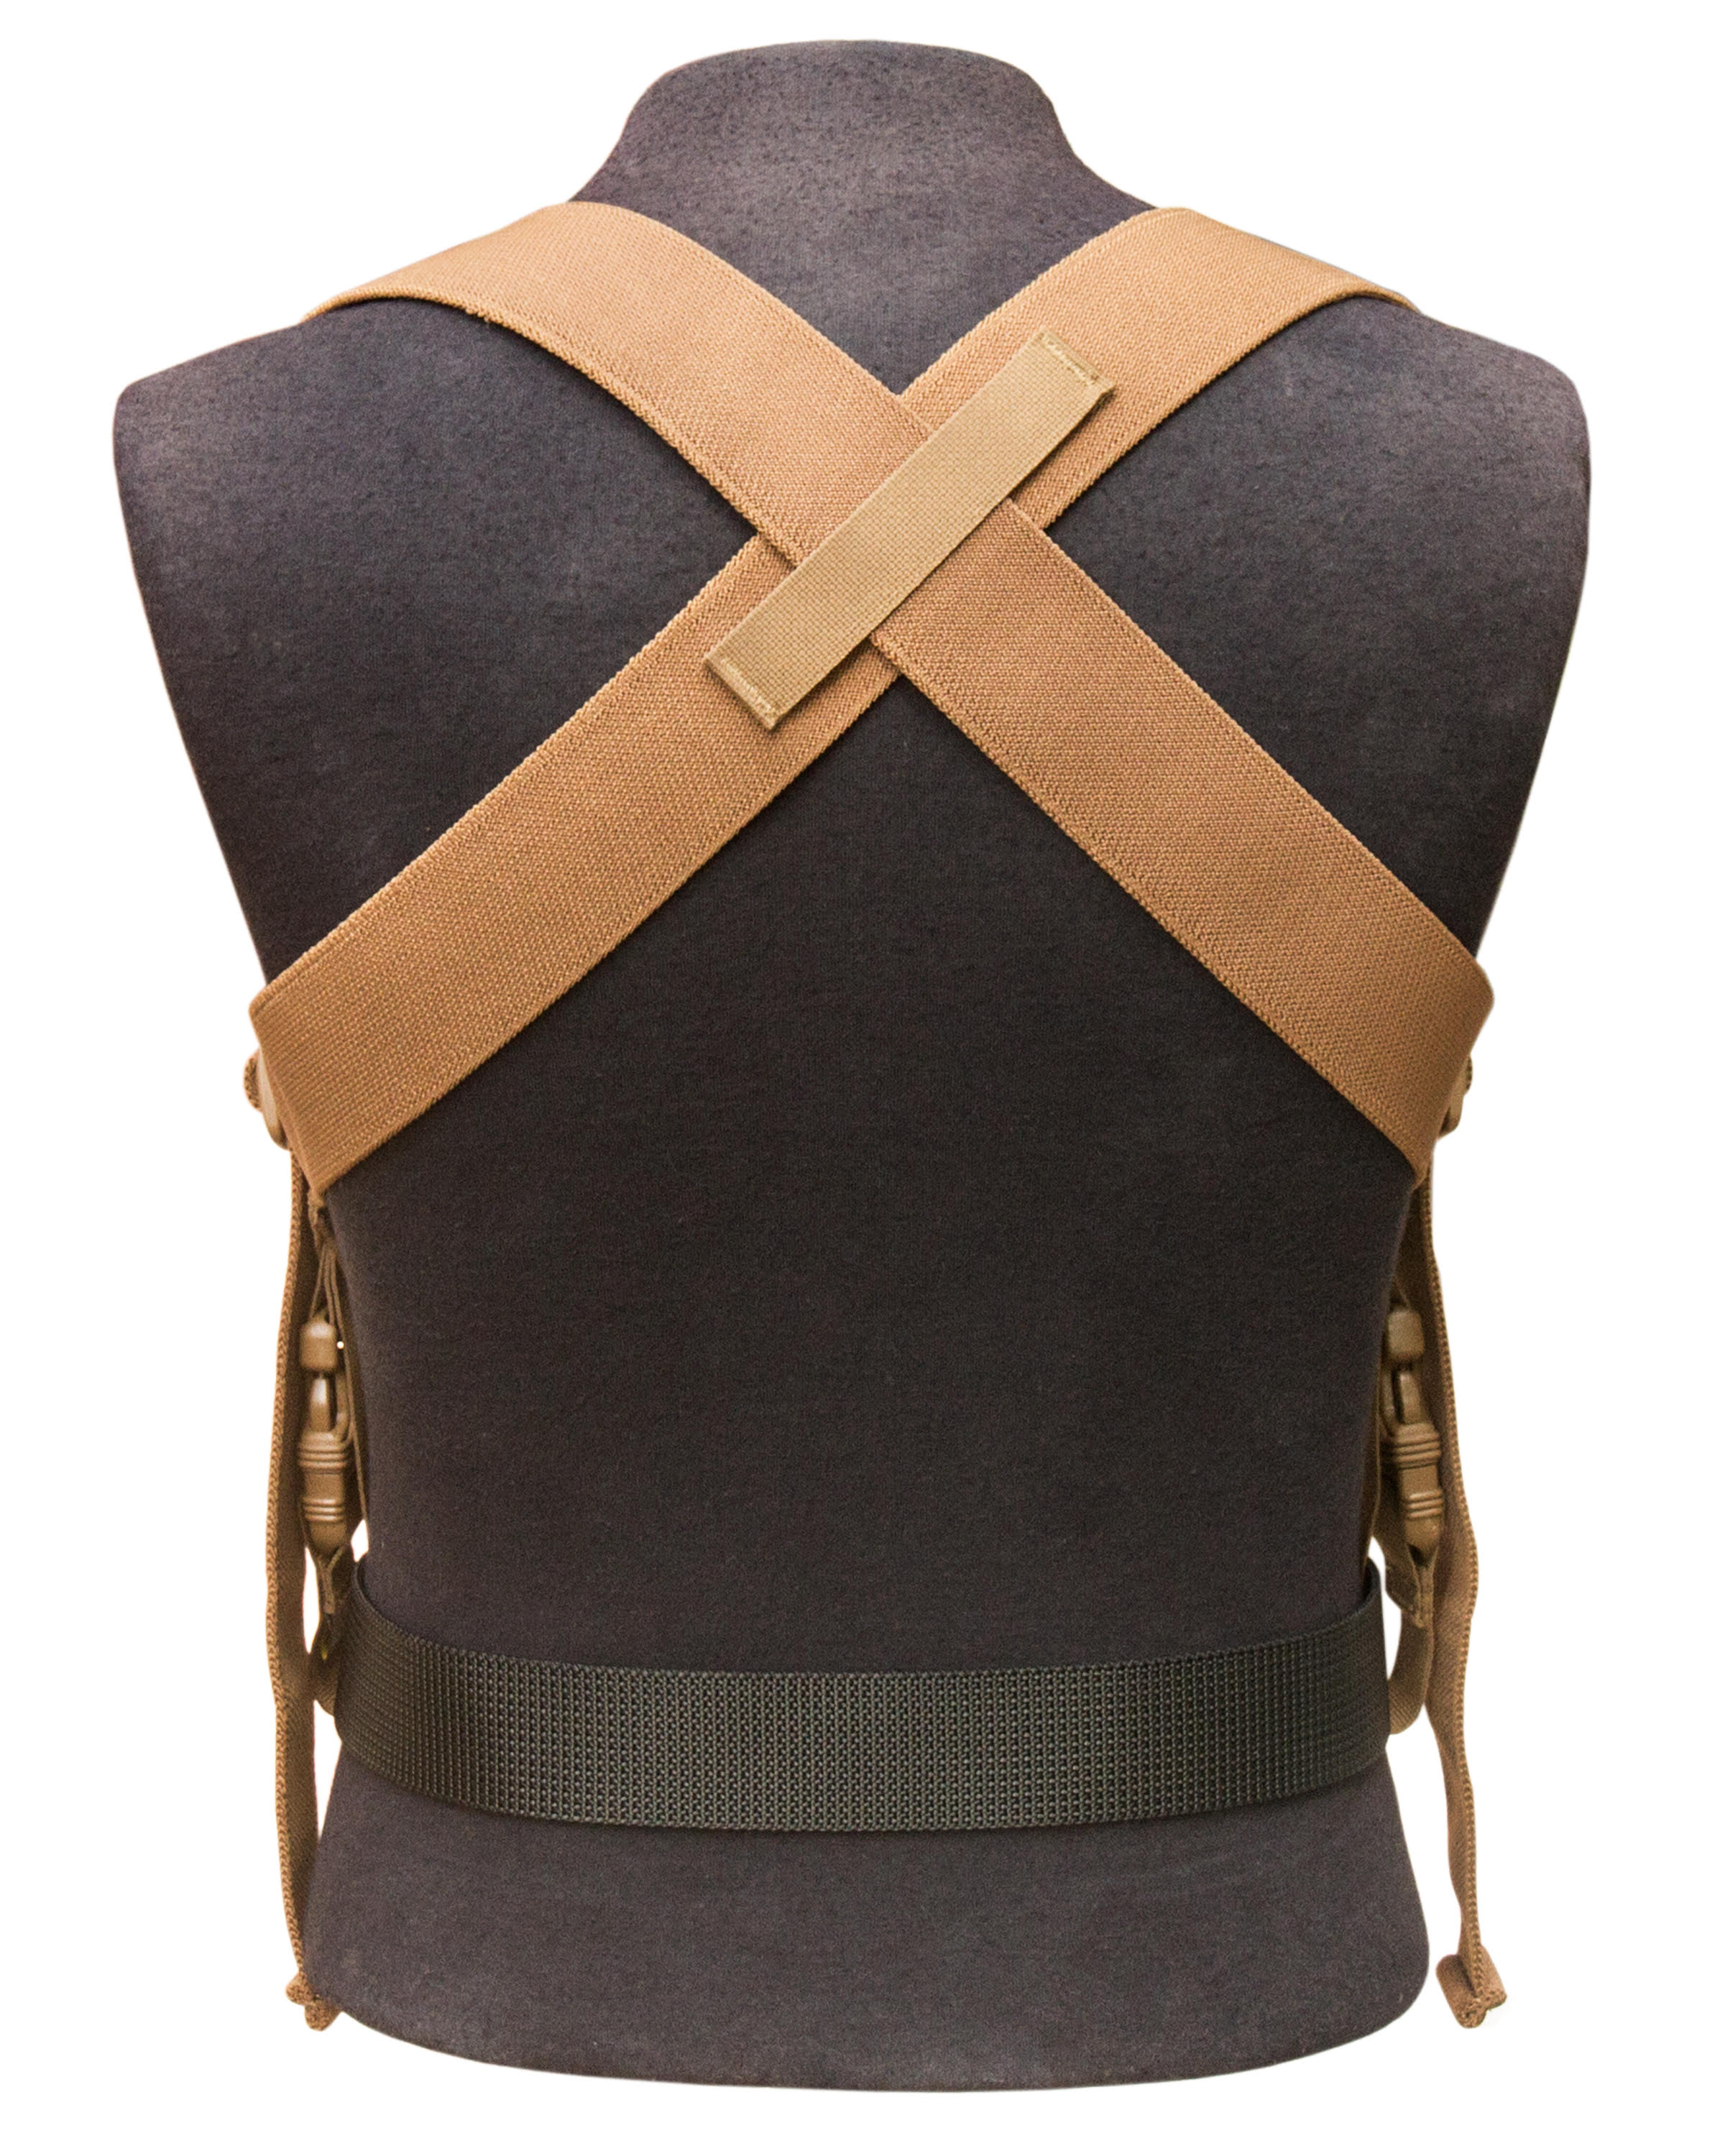 Rothco Tactical Combat Suspenders 2 Heavy Duty Adjustable Quick Release  Buckle - Simpson Advanced Chiropractic & Medical Center